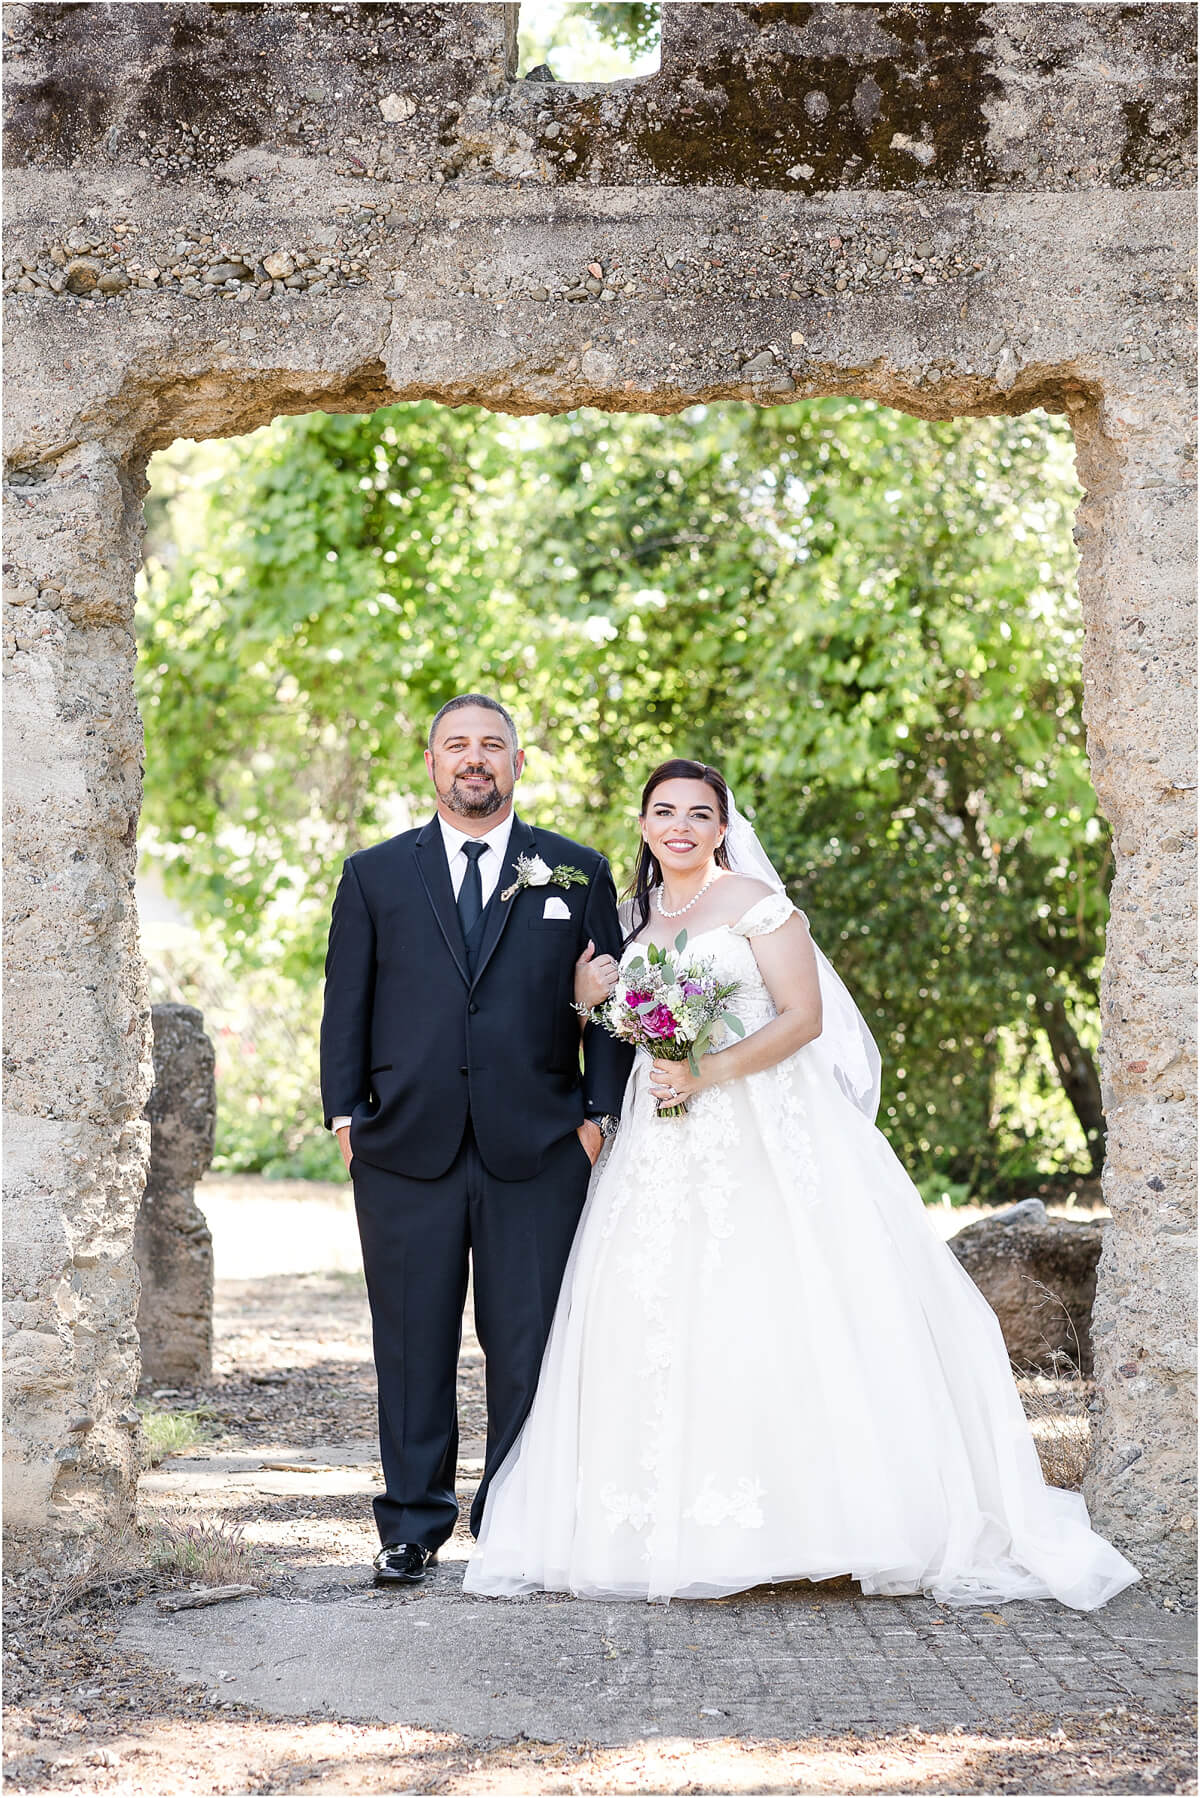 Bride and groom wedding portrait under the stone arch at Ravenswood Historic Site.